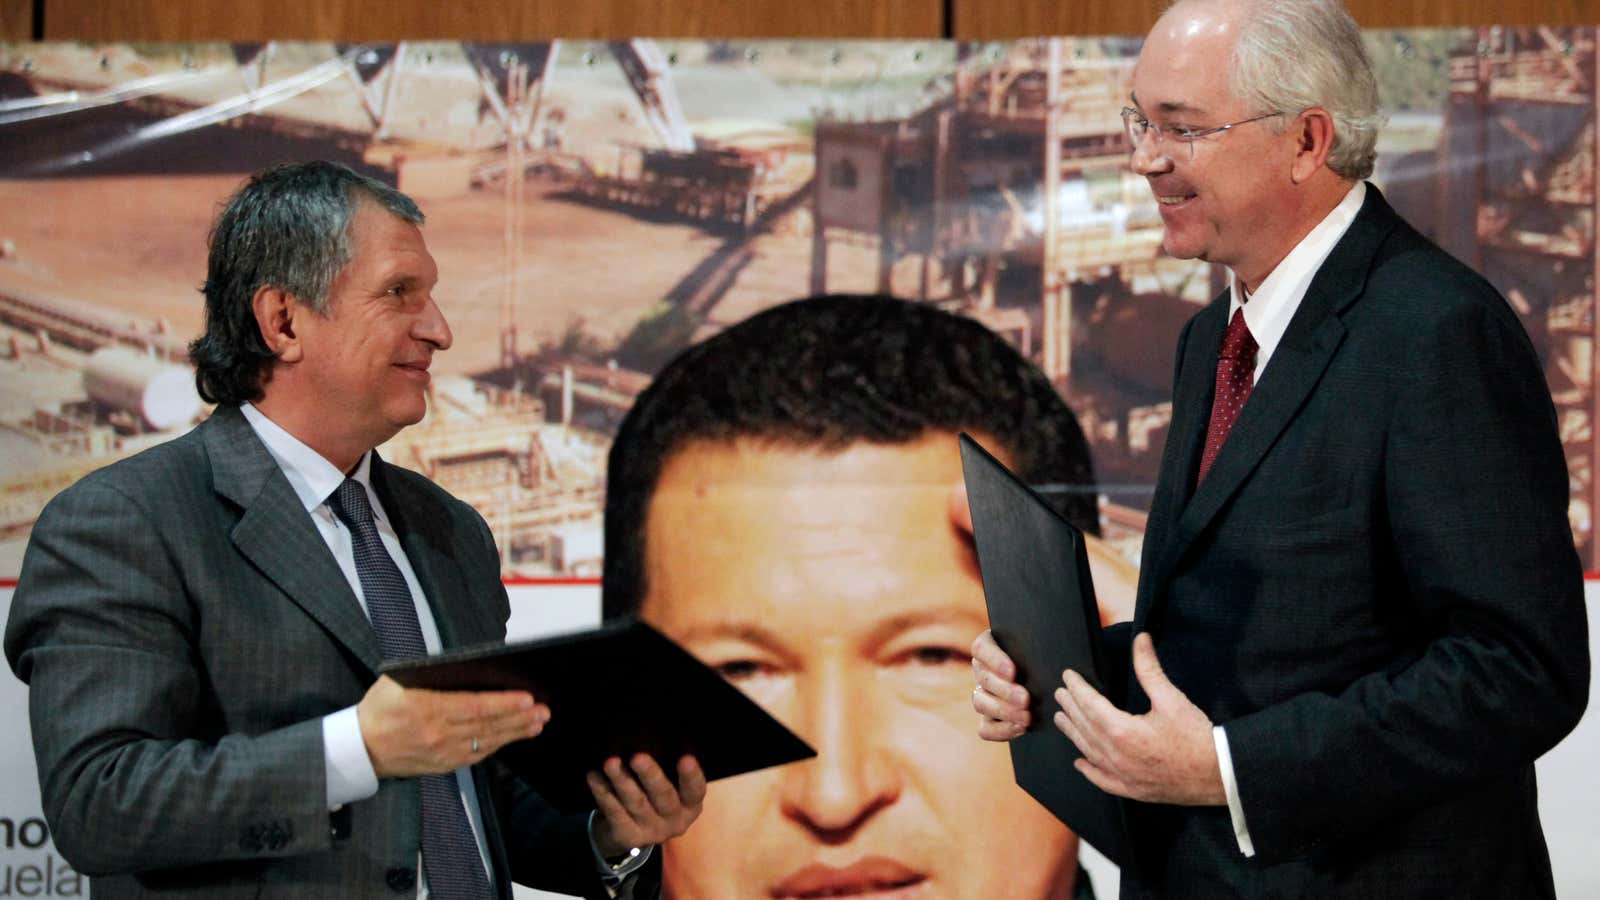 It just got a lot cheaper to celebrate Venezuelan oil deals in front of a giant picture of Hugo Chavez.